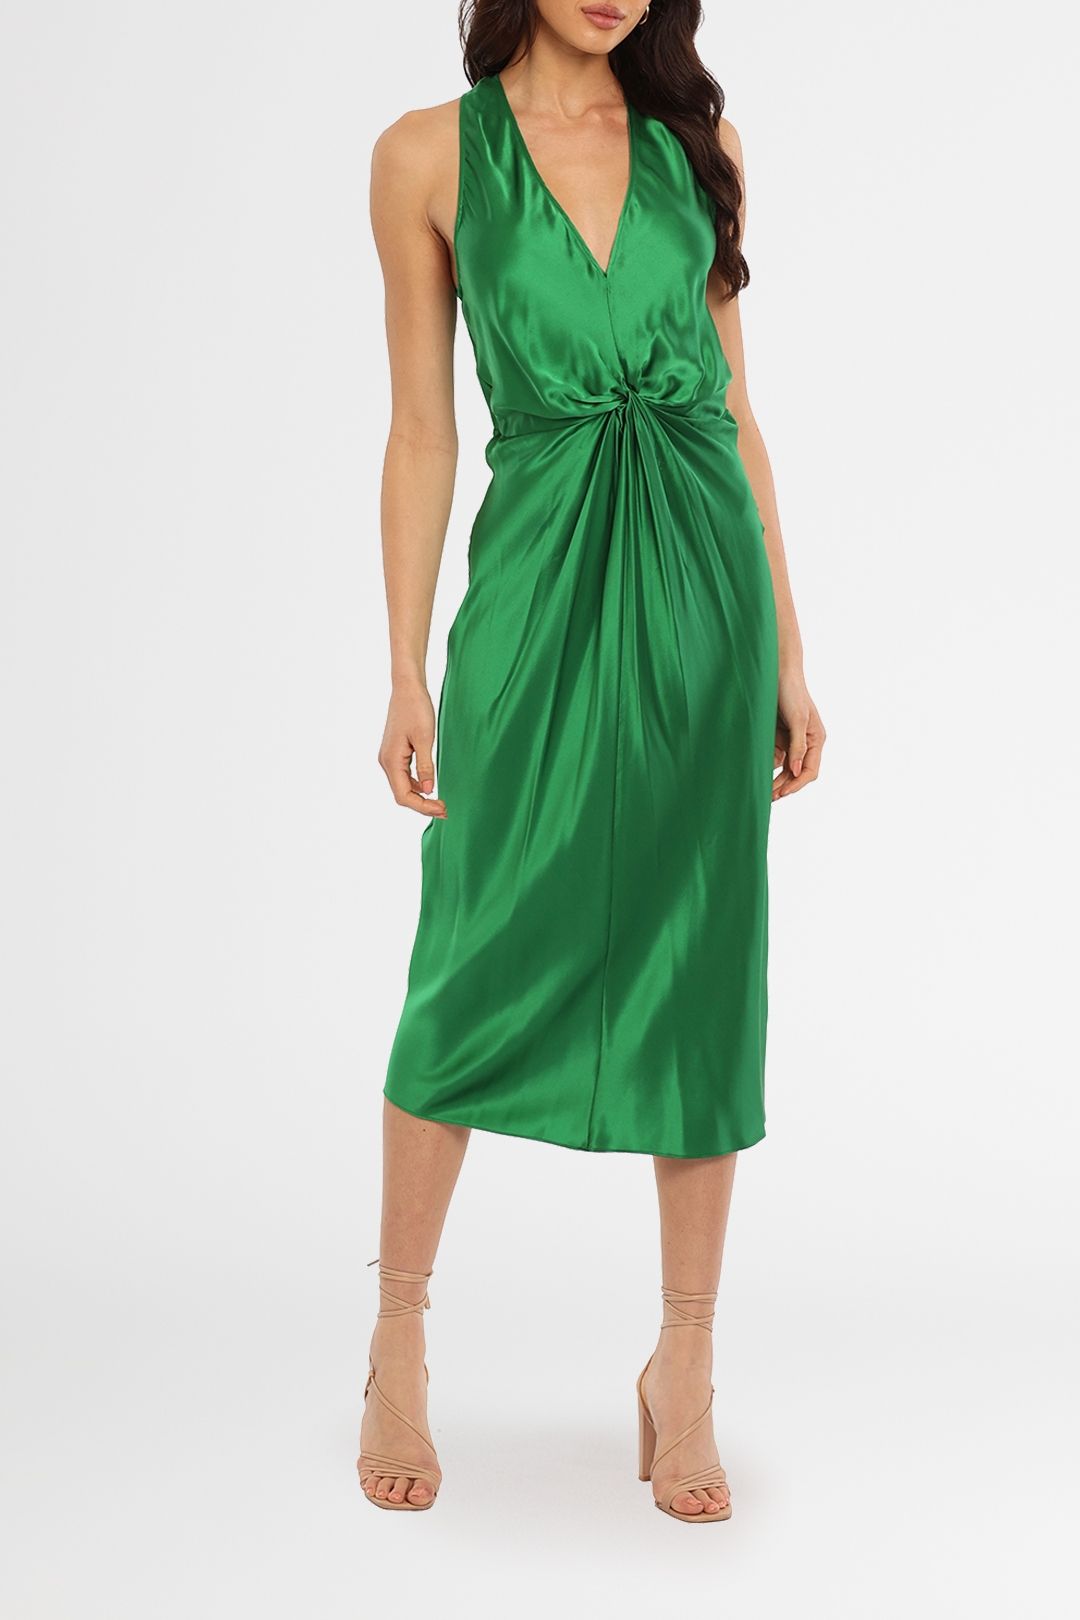 Ginia Lucia Knot Front Dress